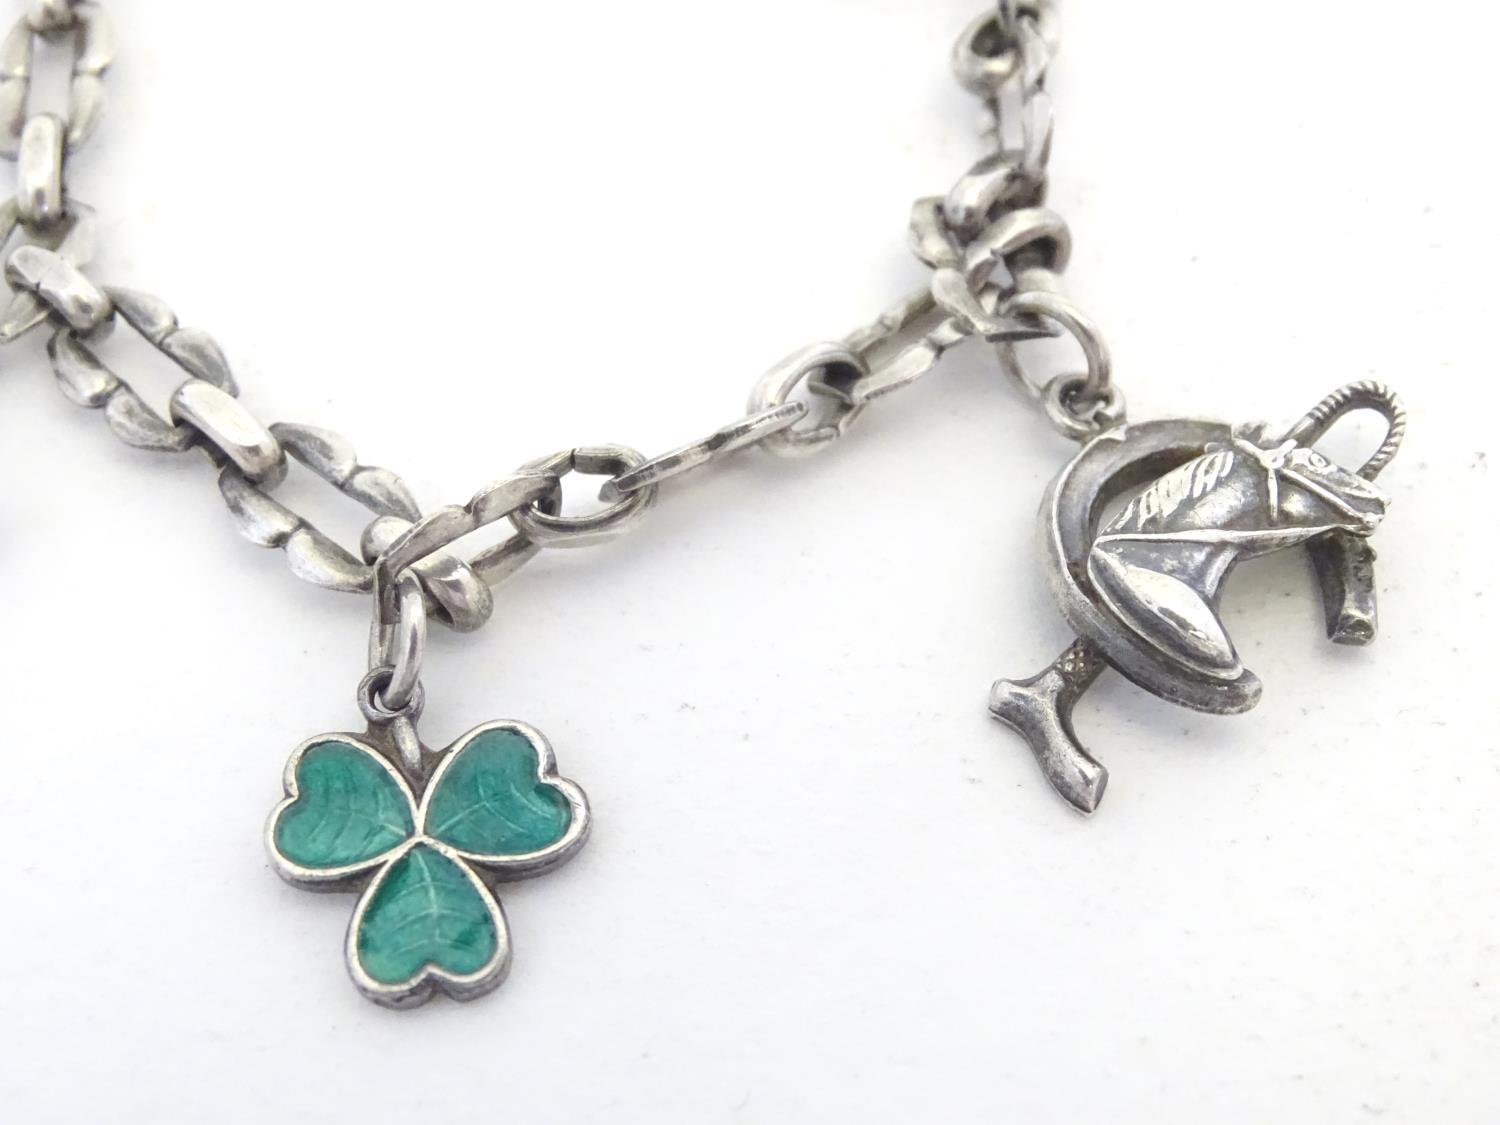 A silver charm bracelet set with various charms including horseshoe, horsehead and horseshoe and - Image 5 of 9